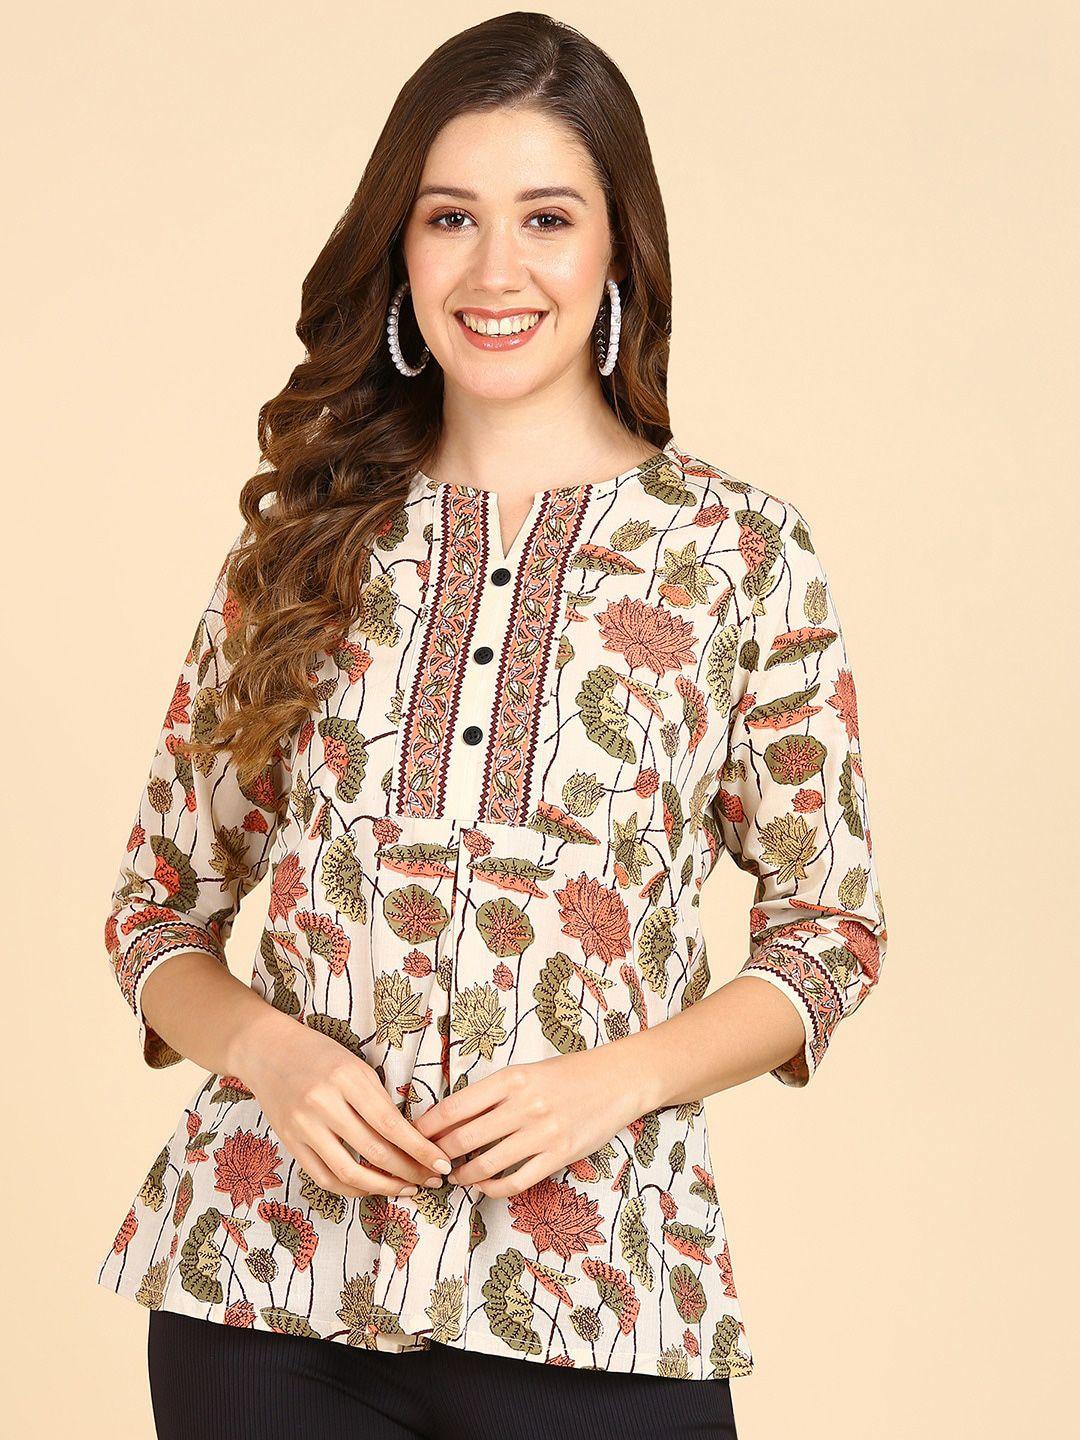 znx clothing floral print cotton top